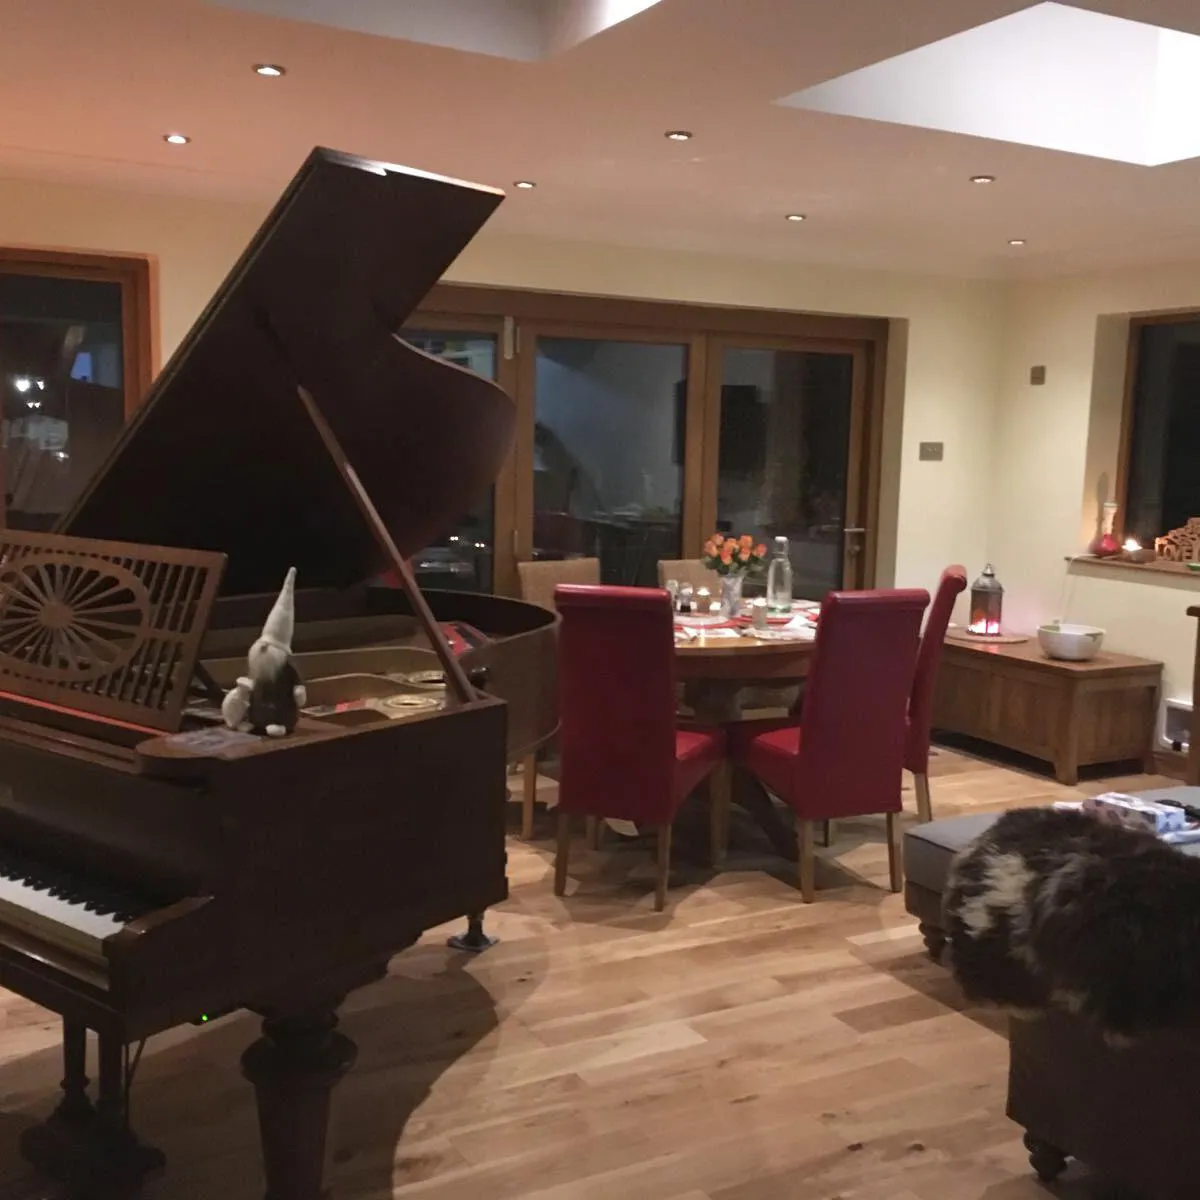 a living room filled with furniture and a grand piano